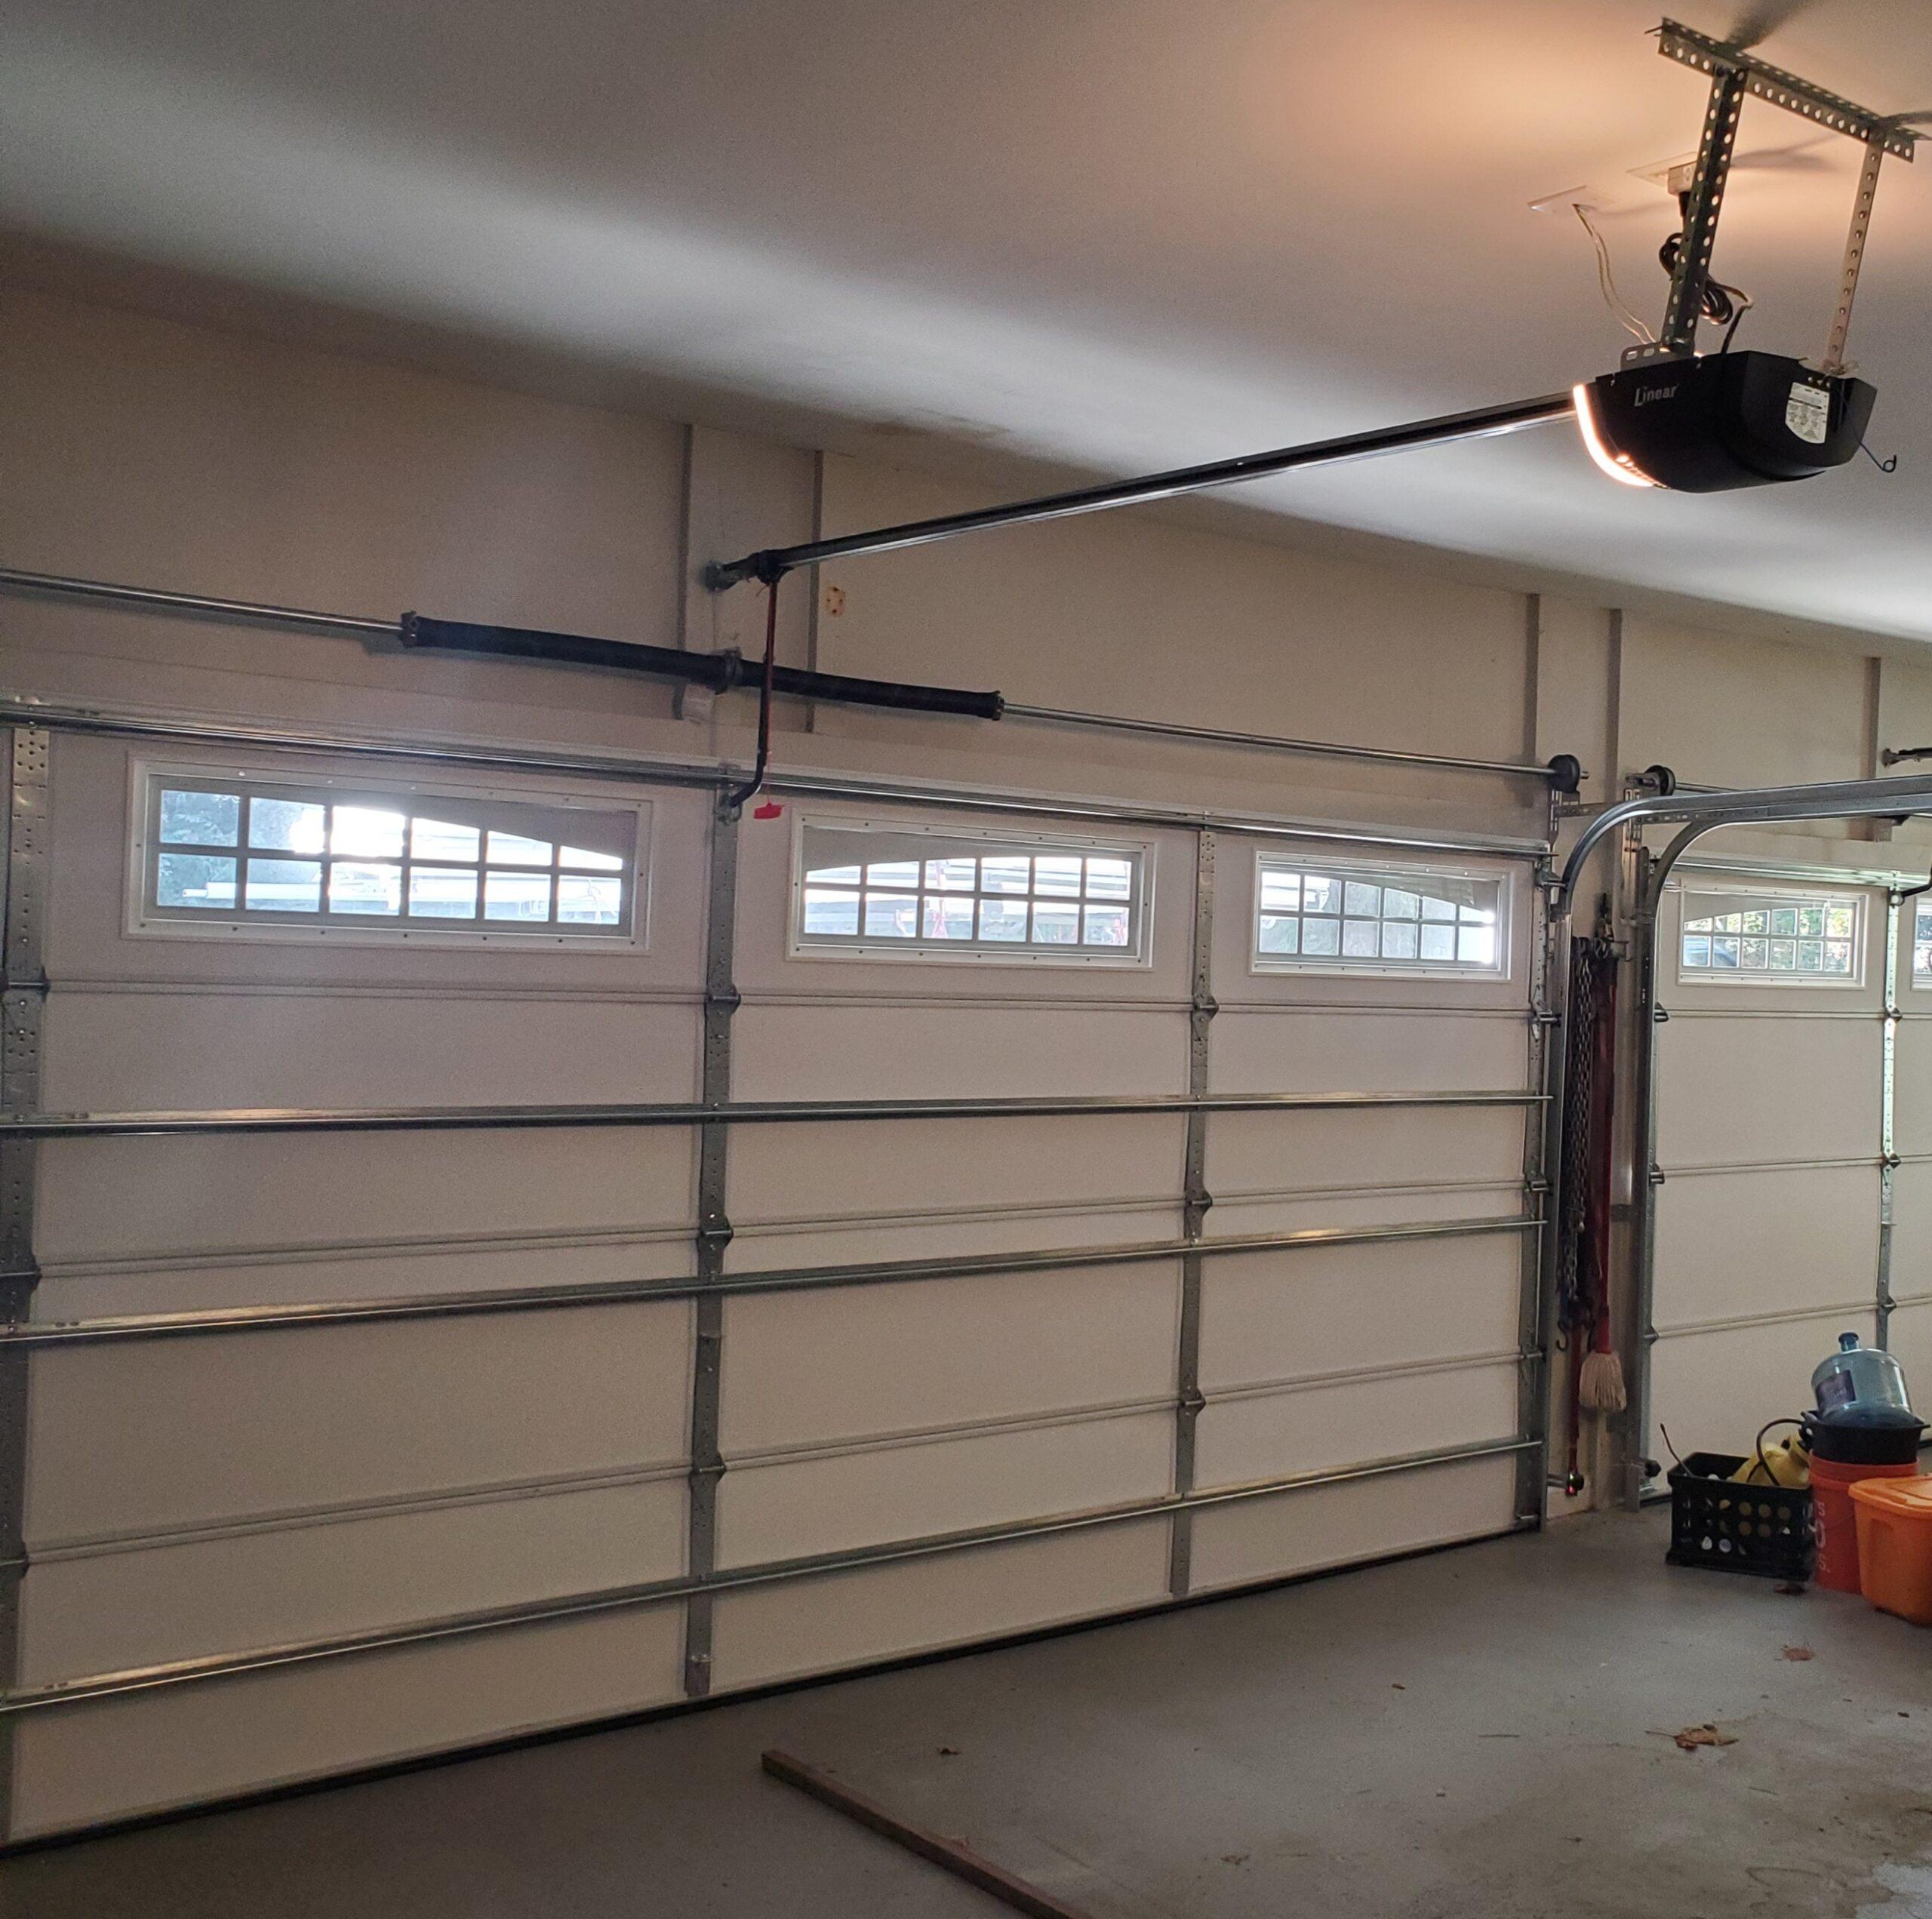 Why Your Garage Door Hums But Does Not Open? Troubleshooting Guide